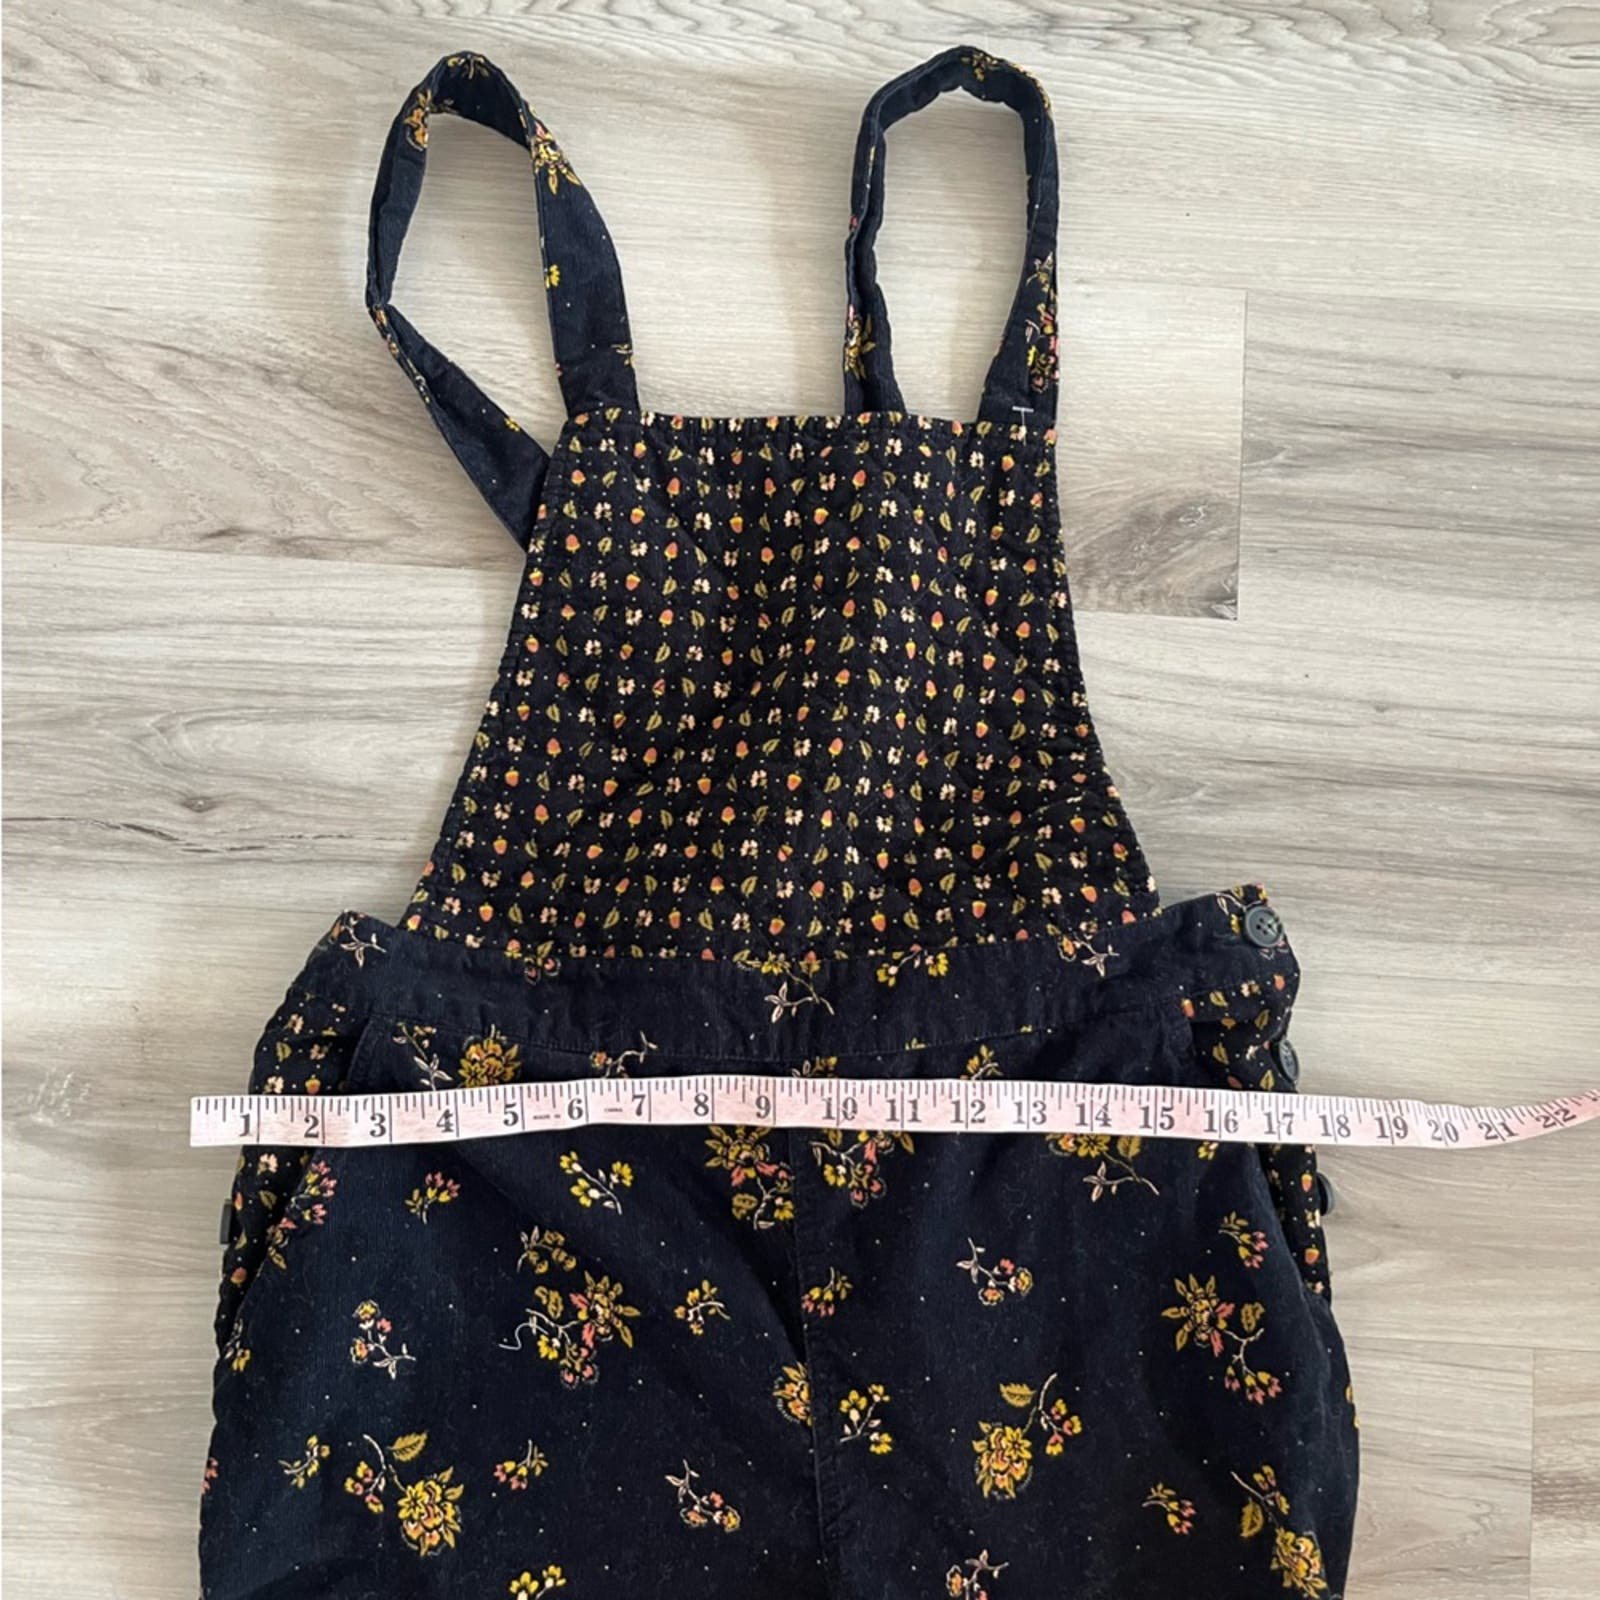 Discounted Madewell M P Corduroy Floral Overalls NX6tY6FTq for sale